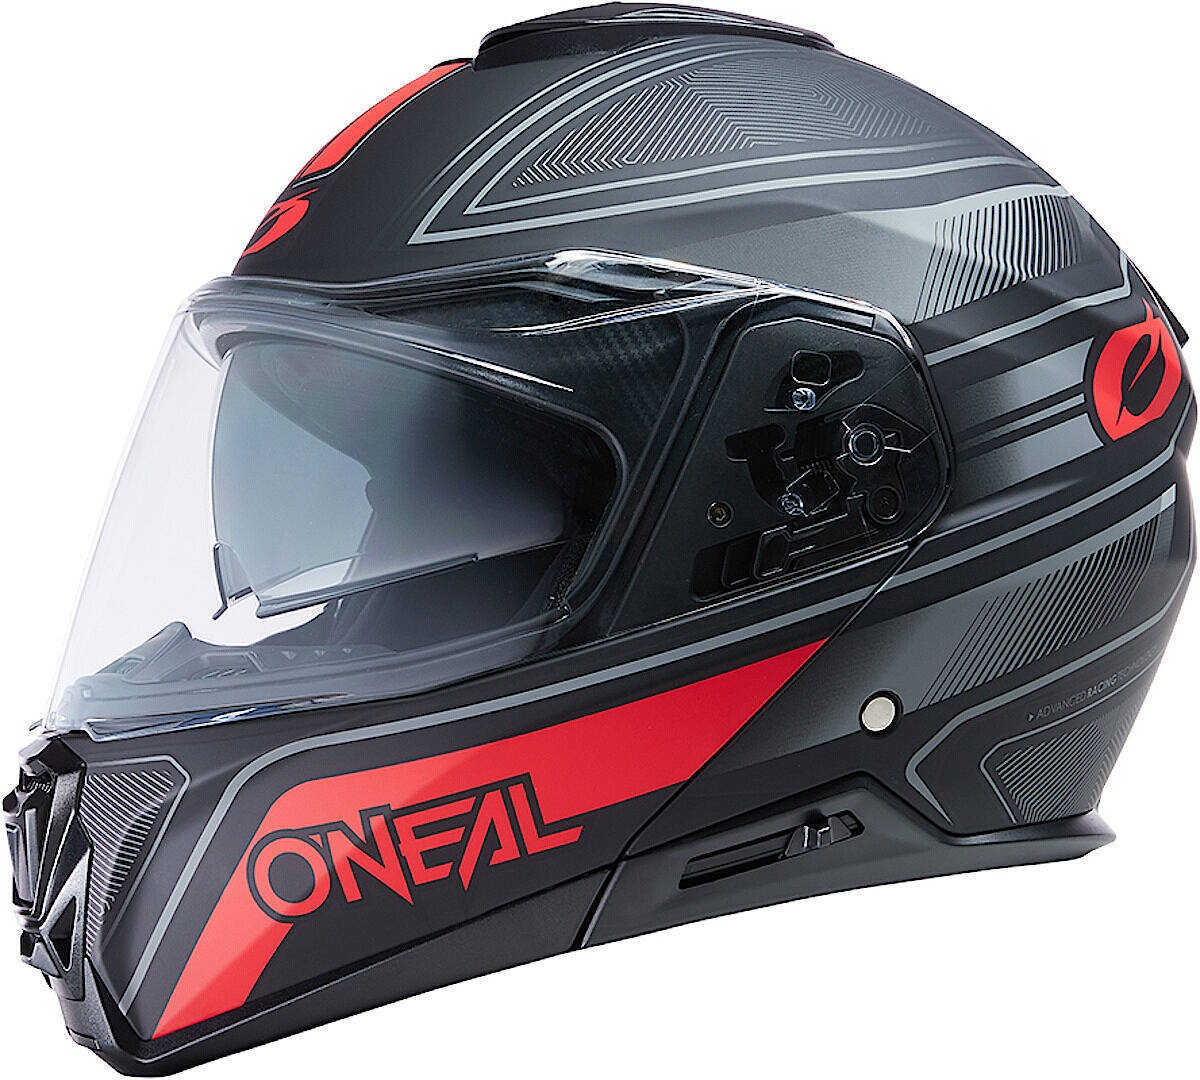 Oneal MSeries String V.22 helm, zwart-rood, XS